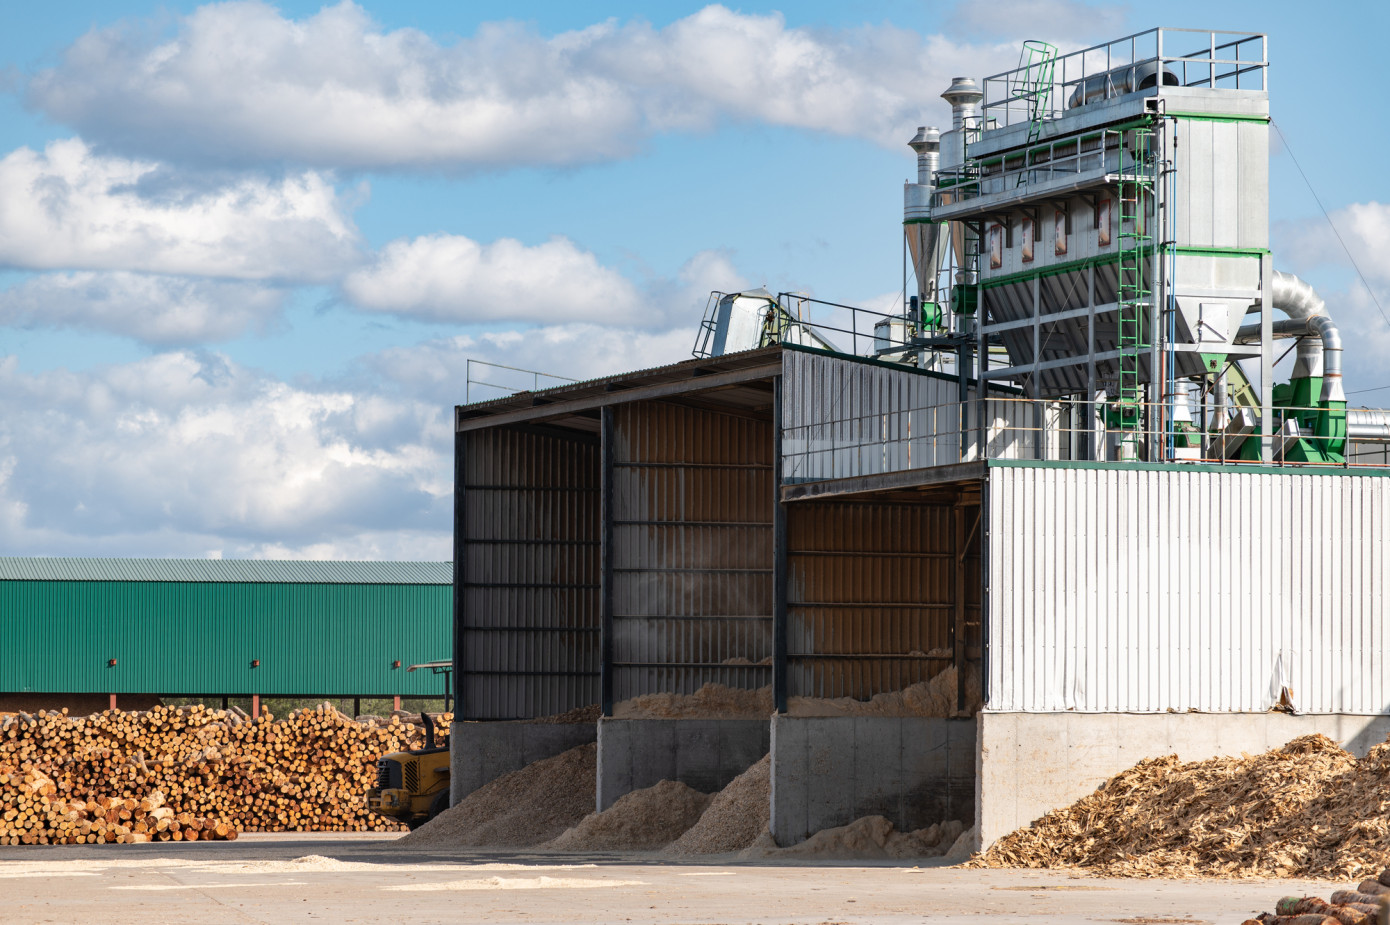 In April, Canadian export wood pellets price expands 10.9%